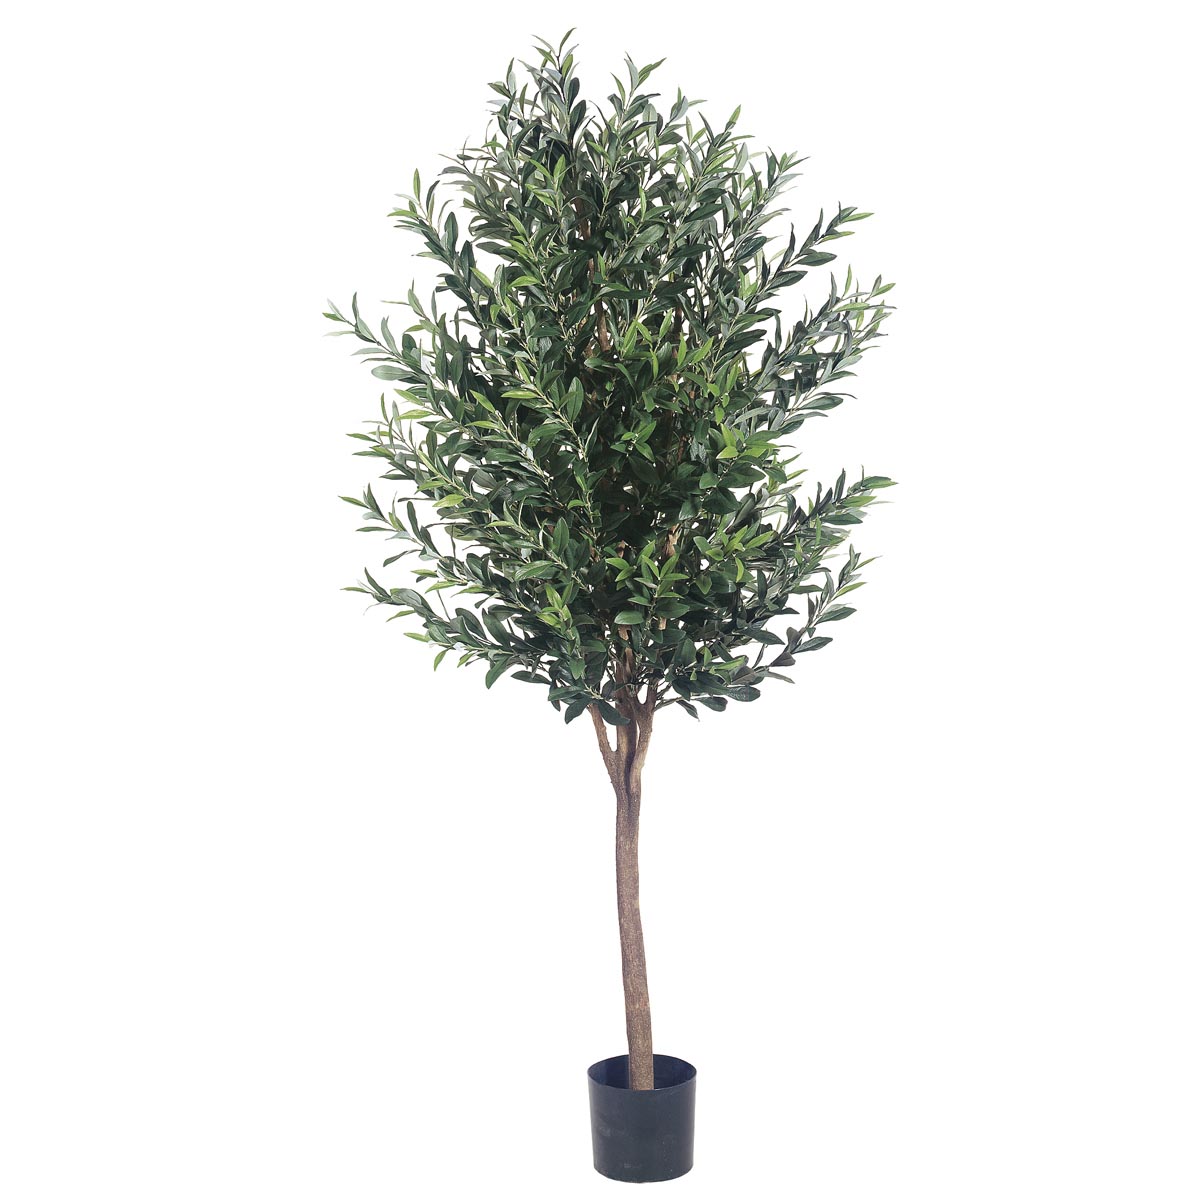 5 Foot Olive Tree: Potted